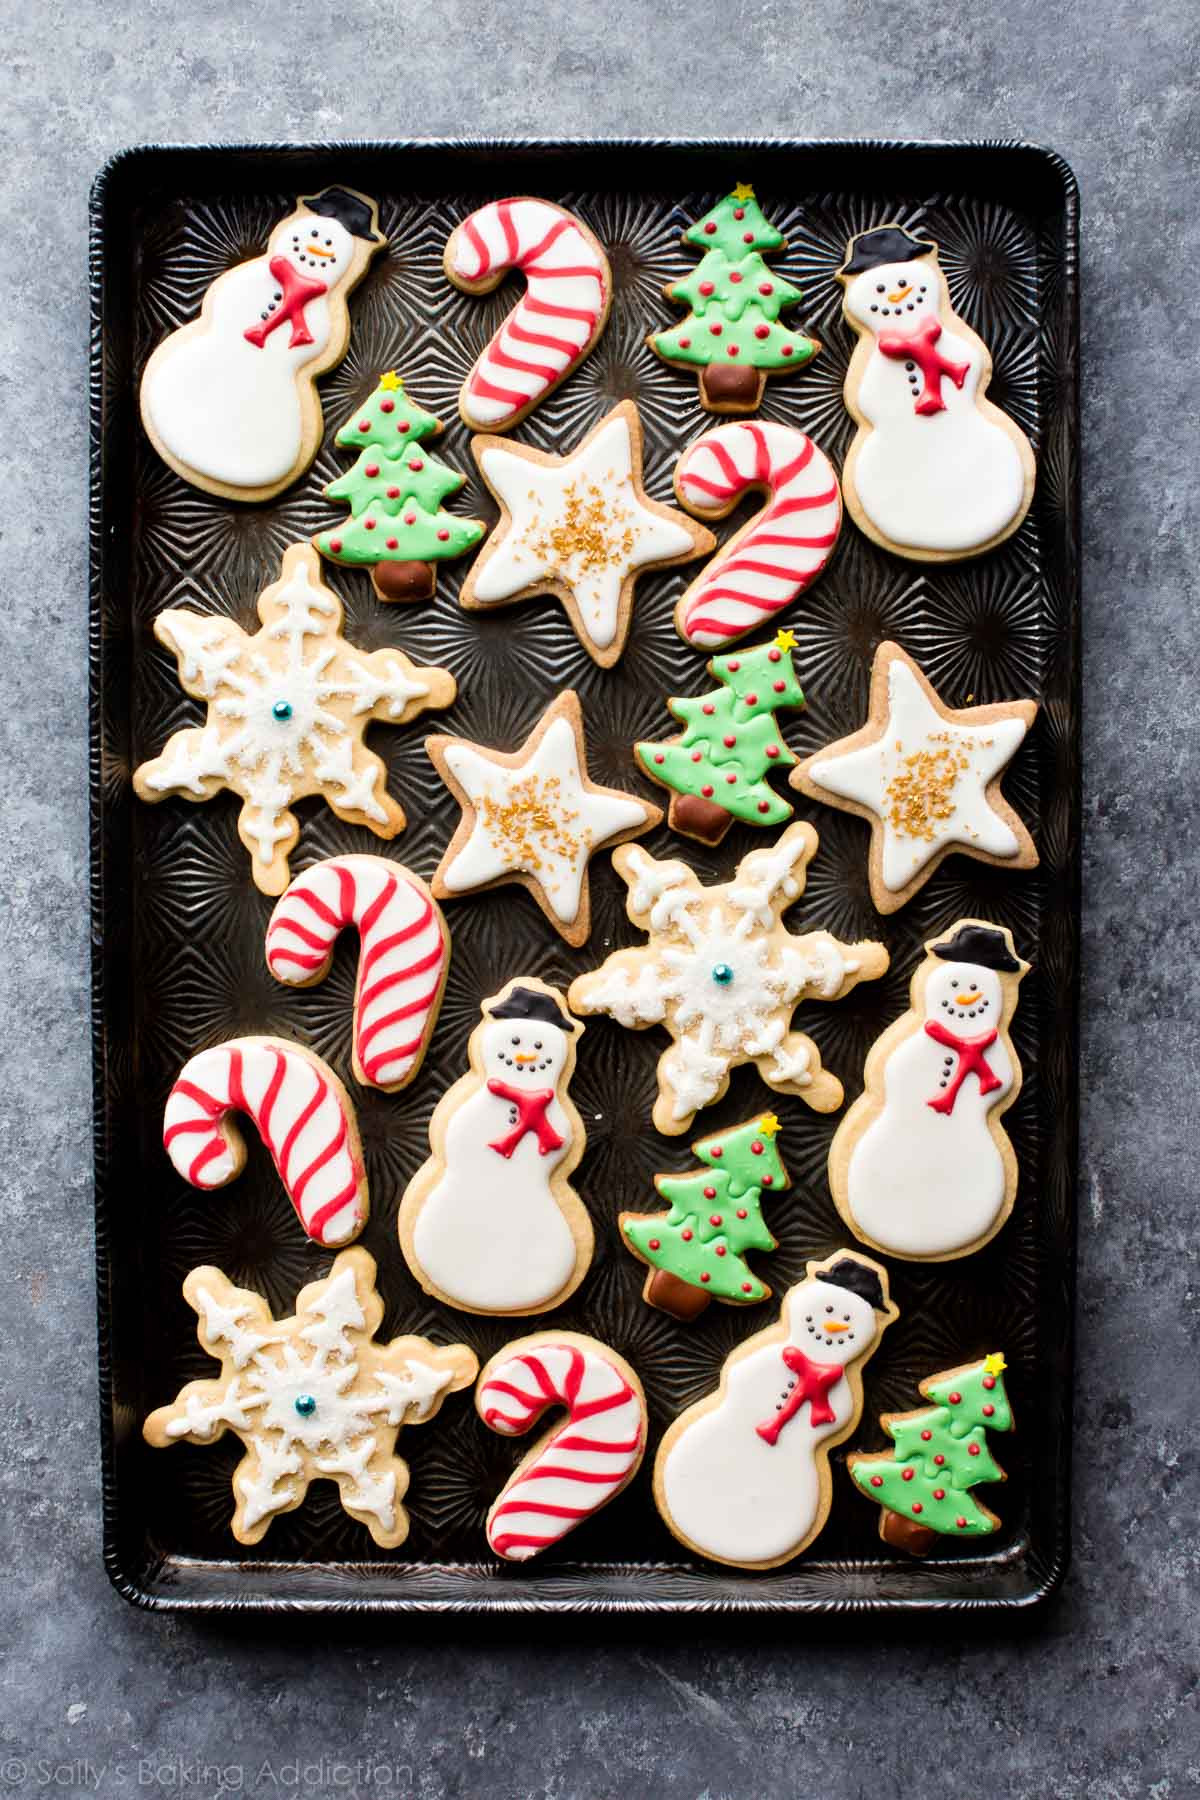 Christmas Cookies Decorated
 1 Sugar Cookie Dough 5 Ways to Decorate Sallys Baking